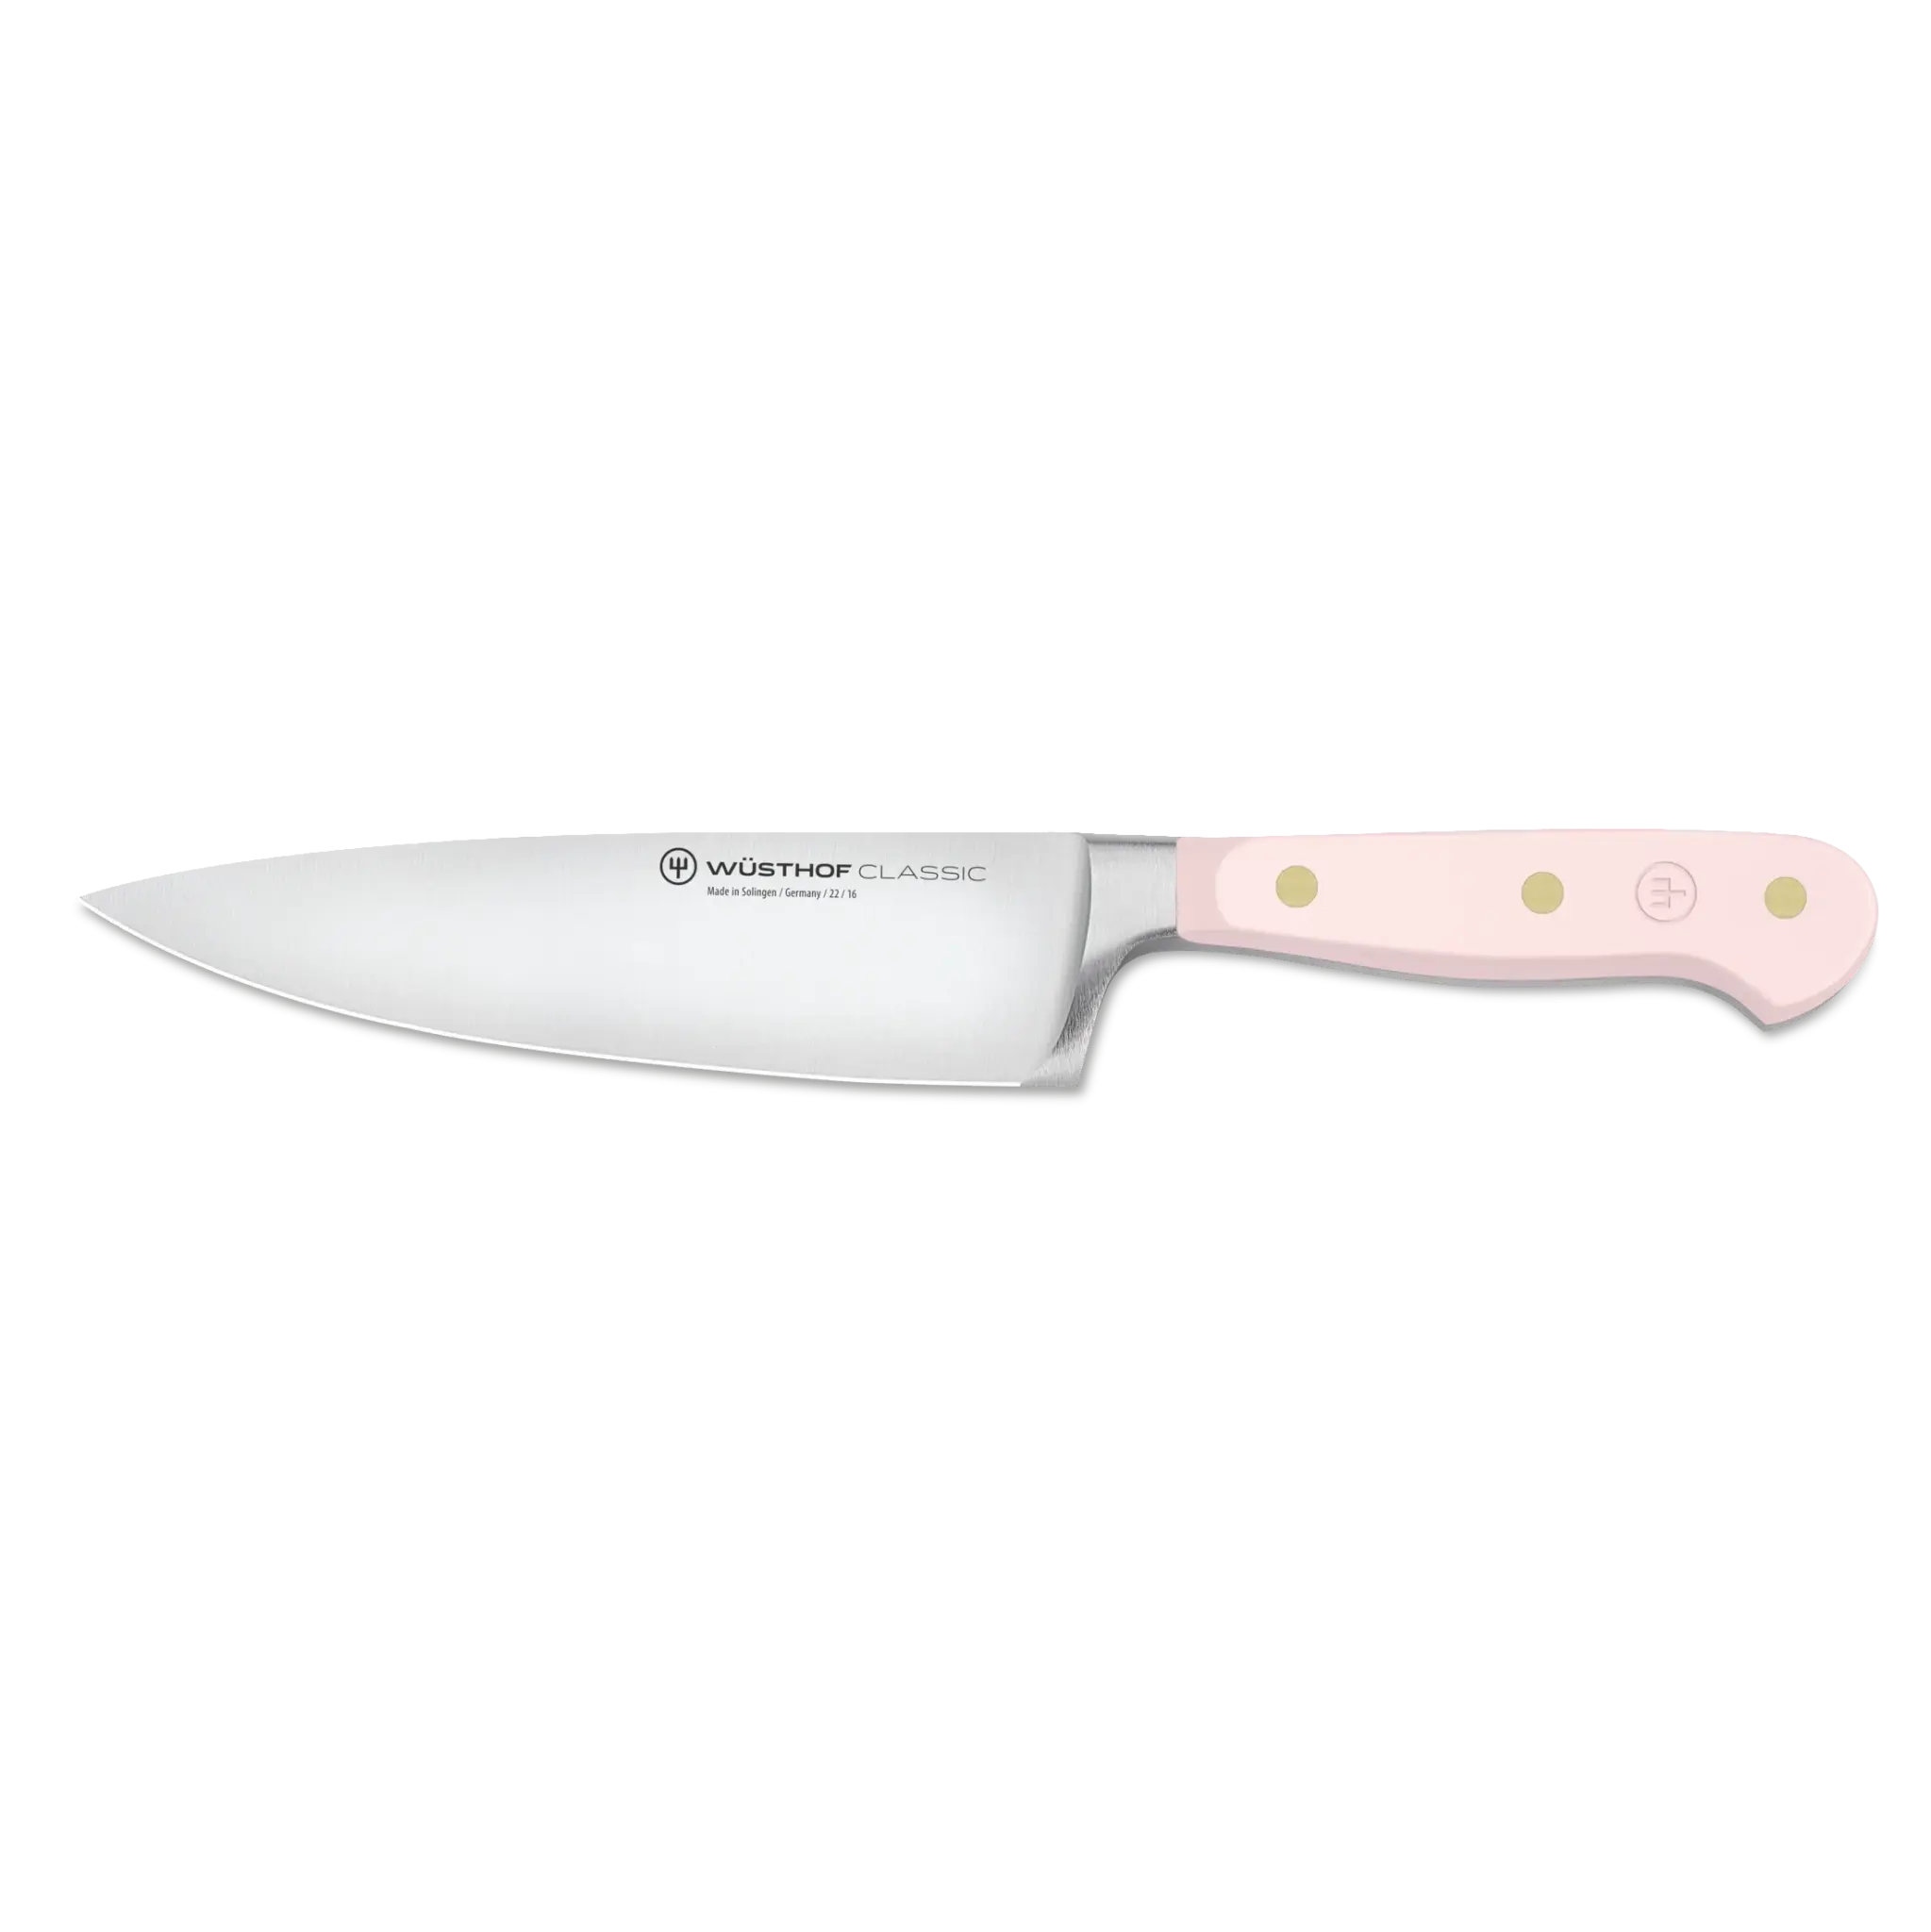 chef's knife, 6 classic pink salt - Whisk